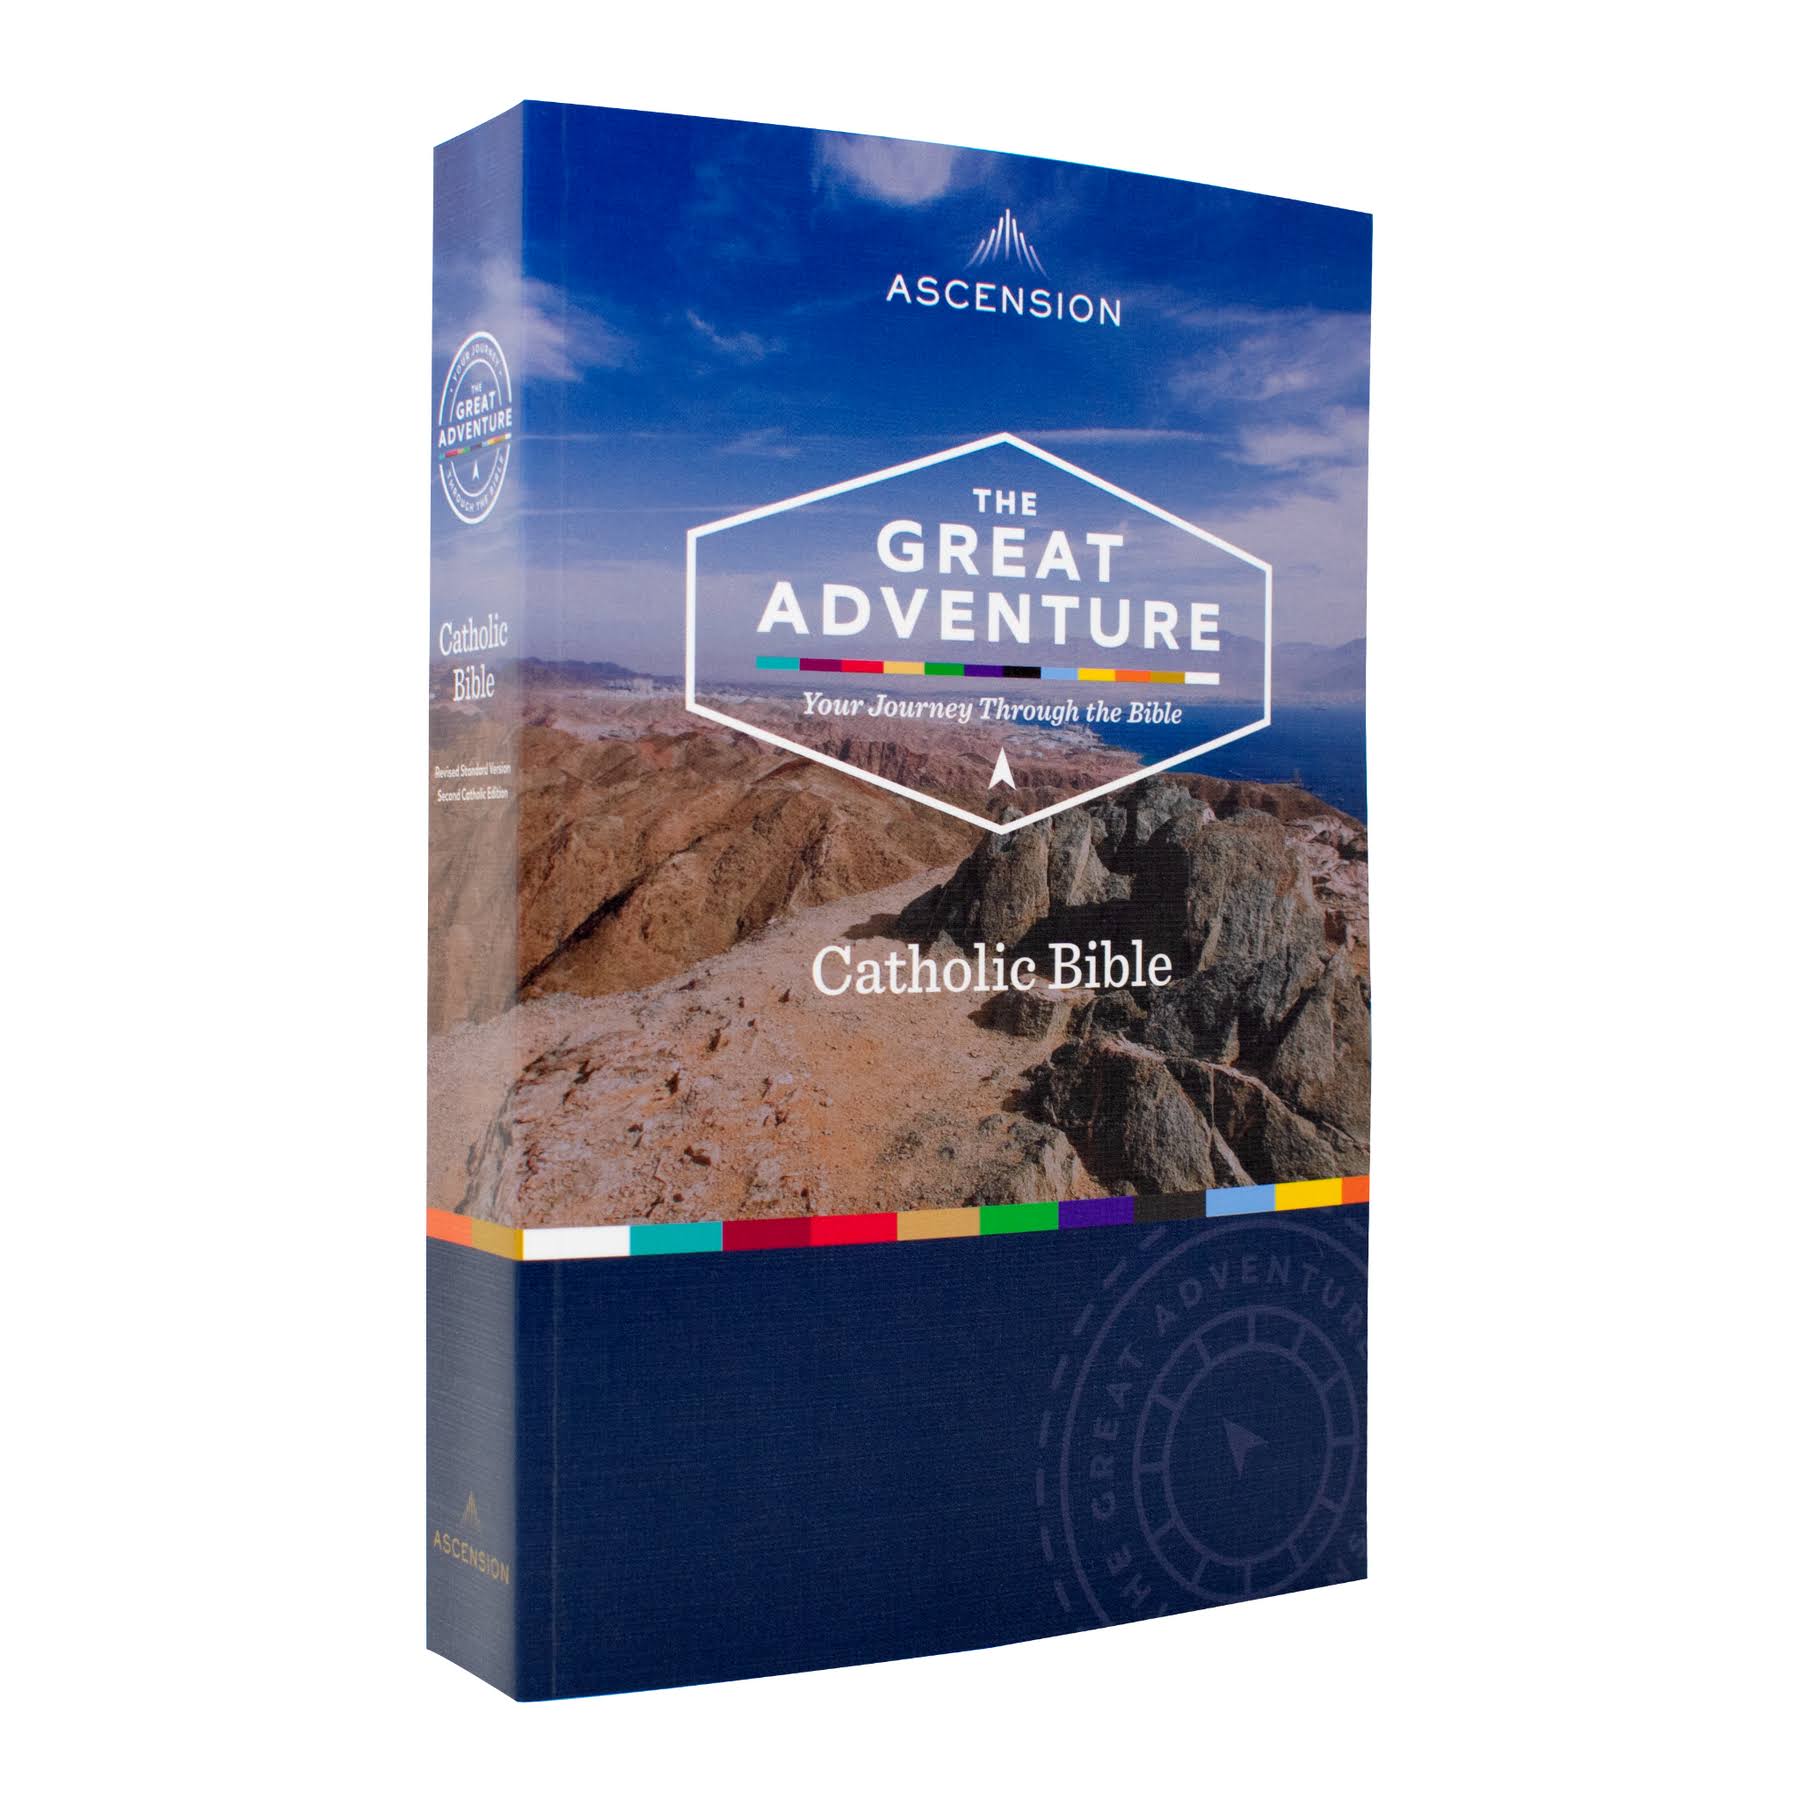 The Great Adventure Catholic Bible by Jeff Cavins